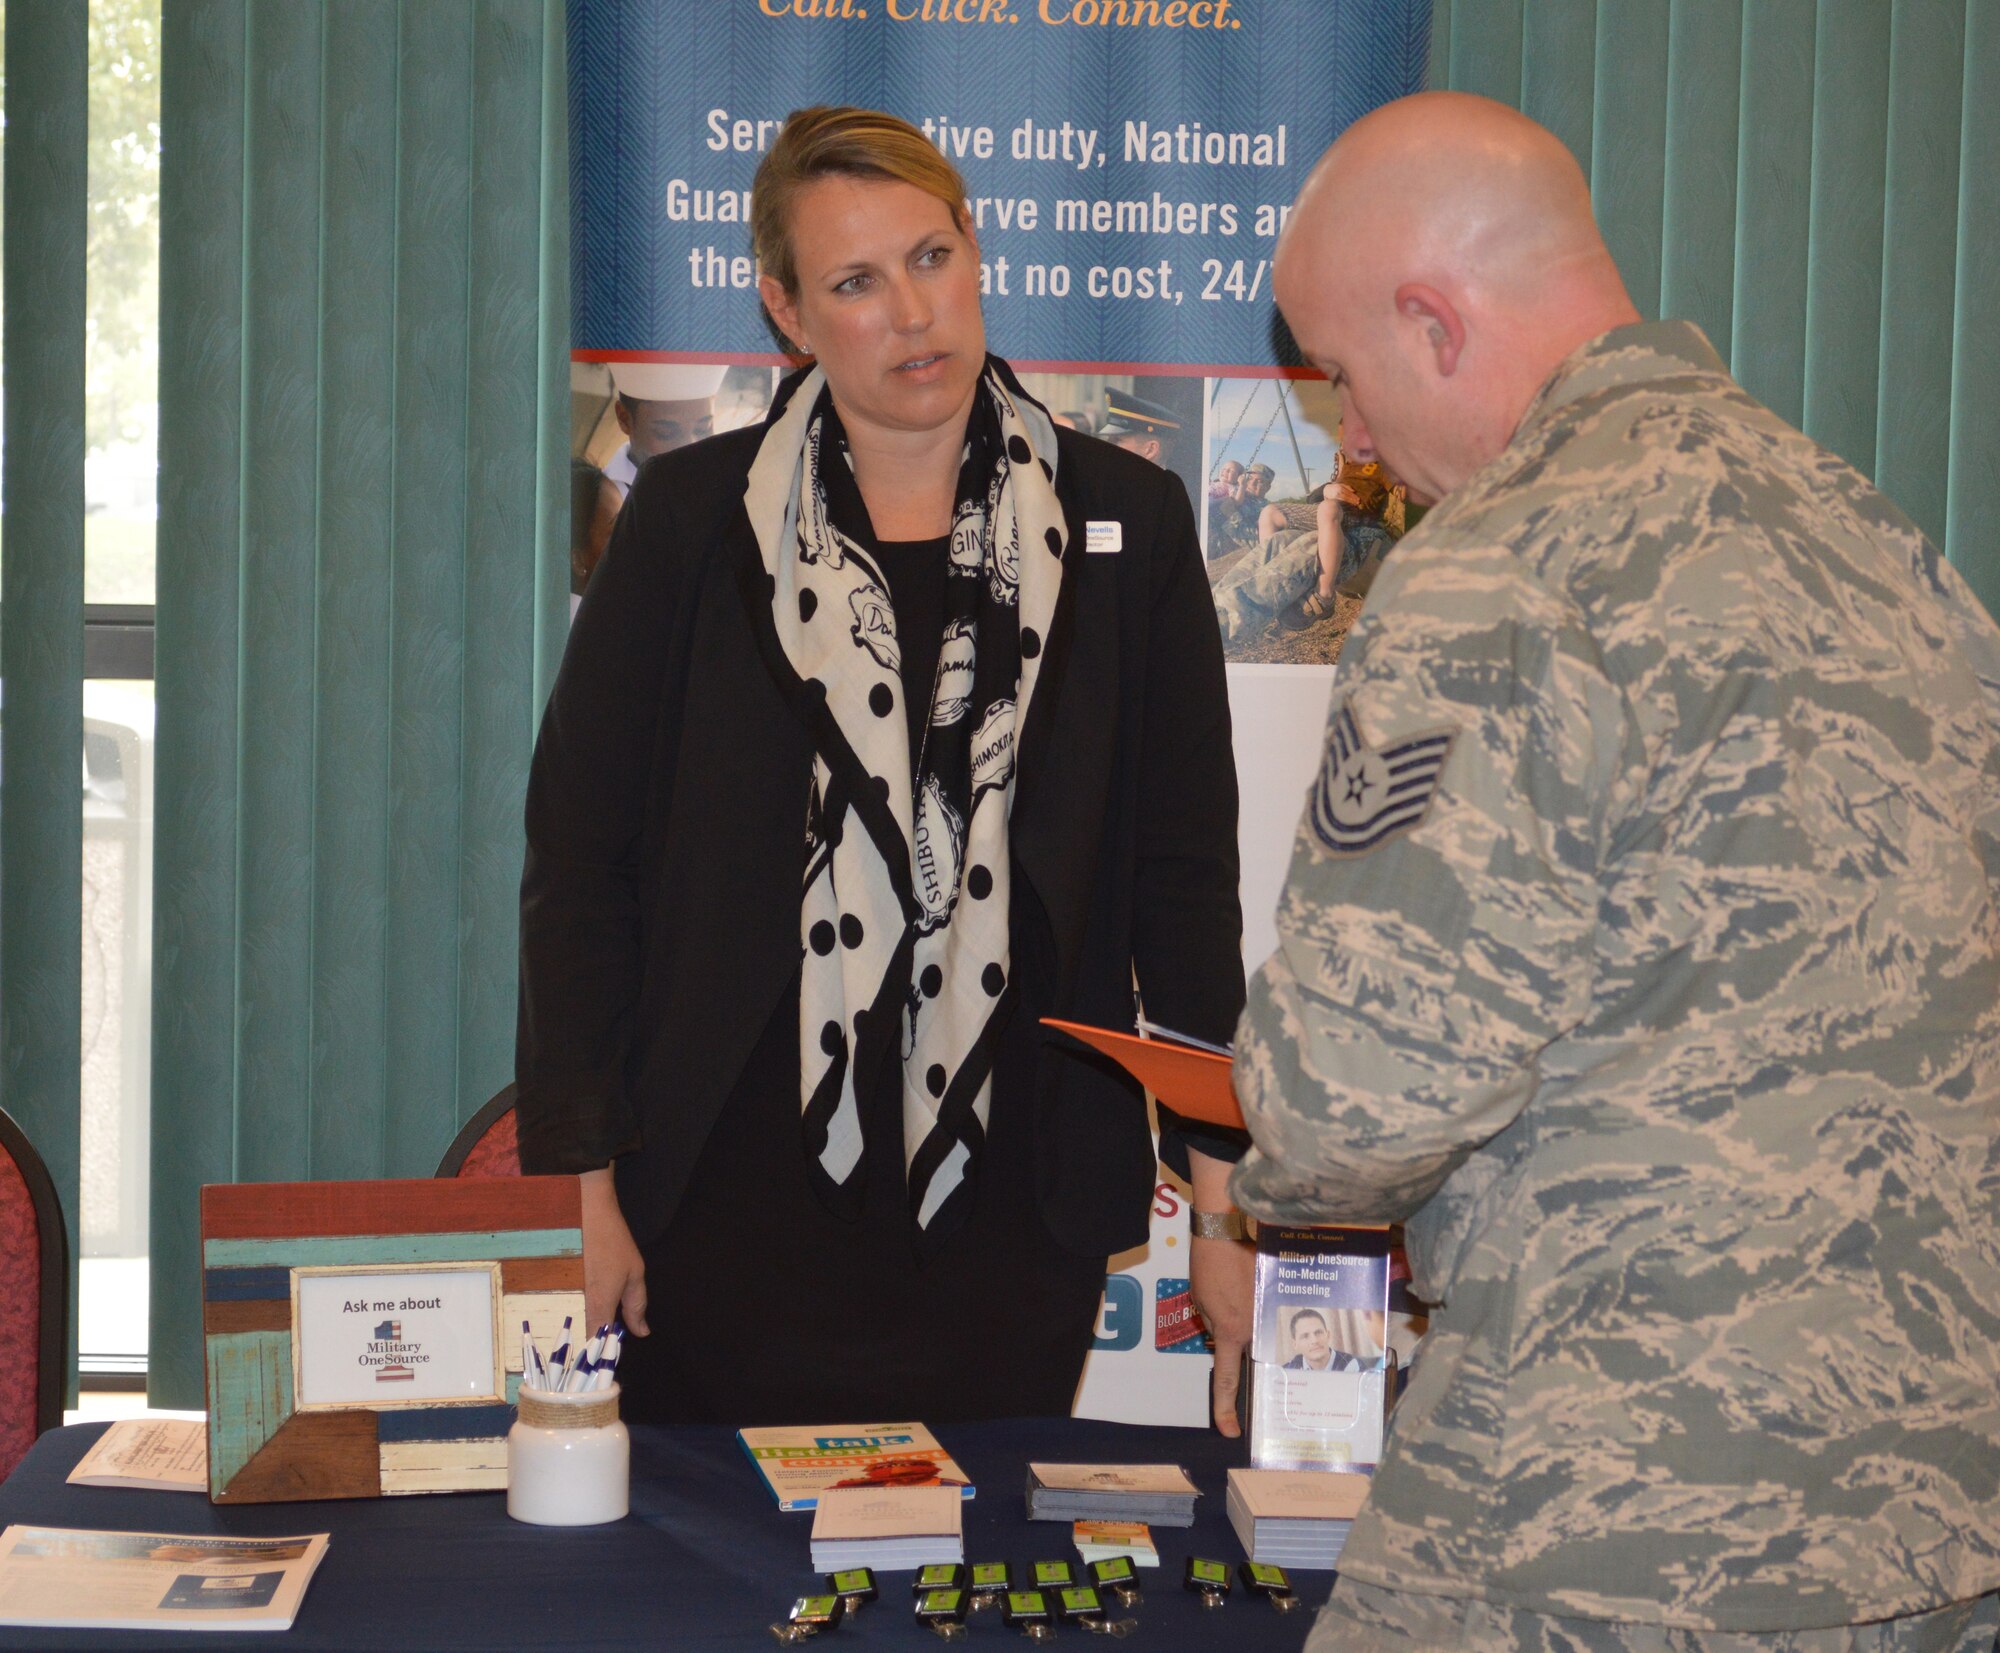 Amy Nevells, New York Military One Source Consultant, talks with an Airman with the 109th Airlift Wing who will be deploying in support of Operation Deep Freeze, about services availalbe to him and his family during the first-ever White Ribbon event at Stratton Air National Guard Base, New York, on Oct. 3, 2015. The White Ribbon is very similar to the Yellow Ribbon events offered to those affected by contingency deployments. The White Ribbon is unique to the 109th AW because of their annual deployments to McMurdo Station, Antarctica. (U.S. Air National Guard photo by Tech. Sgt. Catharine Schmidt/Released)